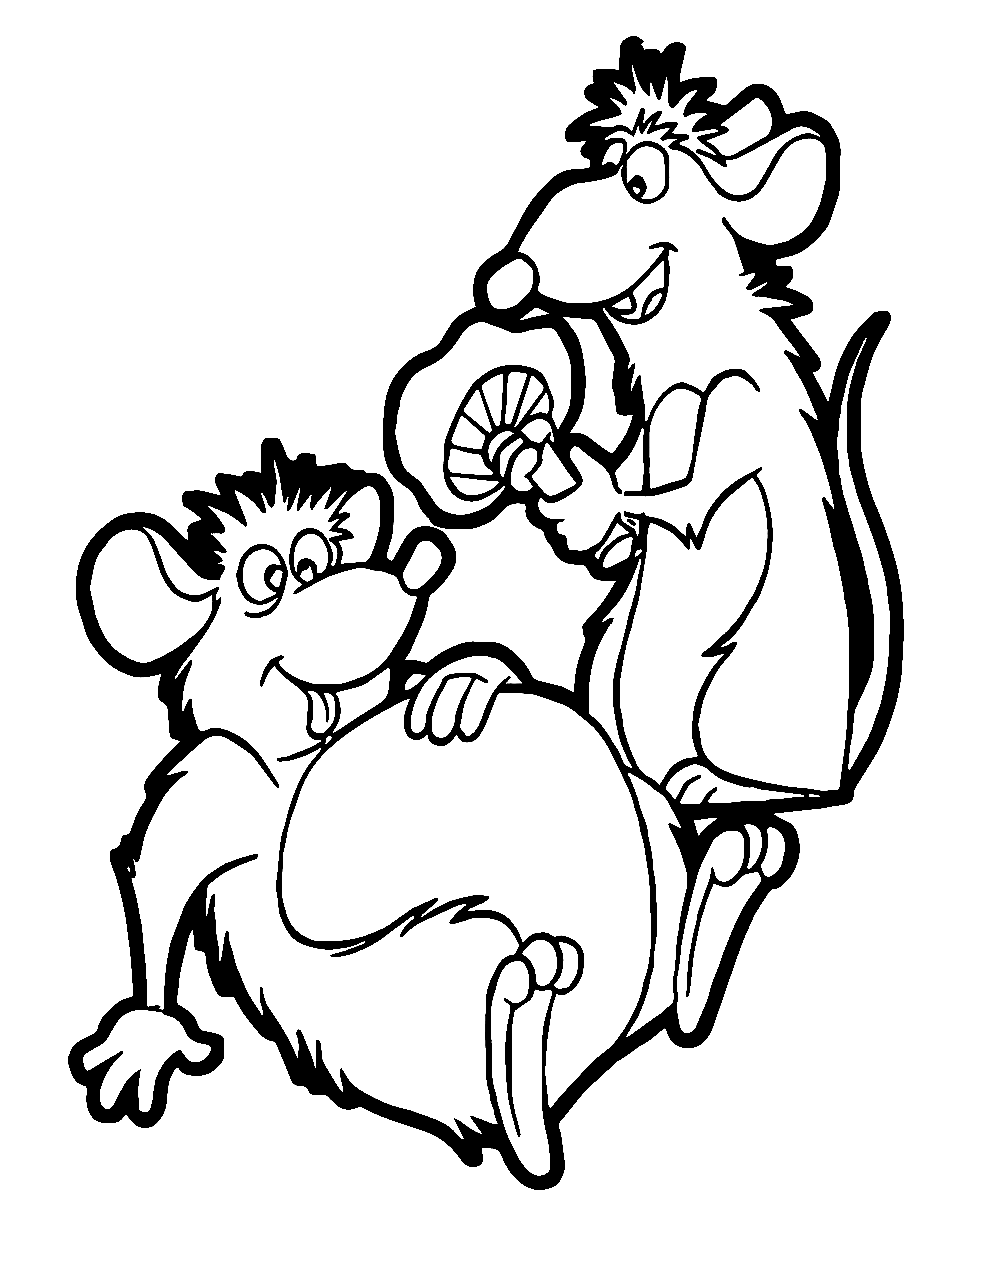 Funny Remy And Emile Coloring Page